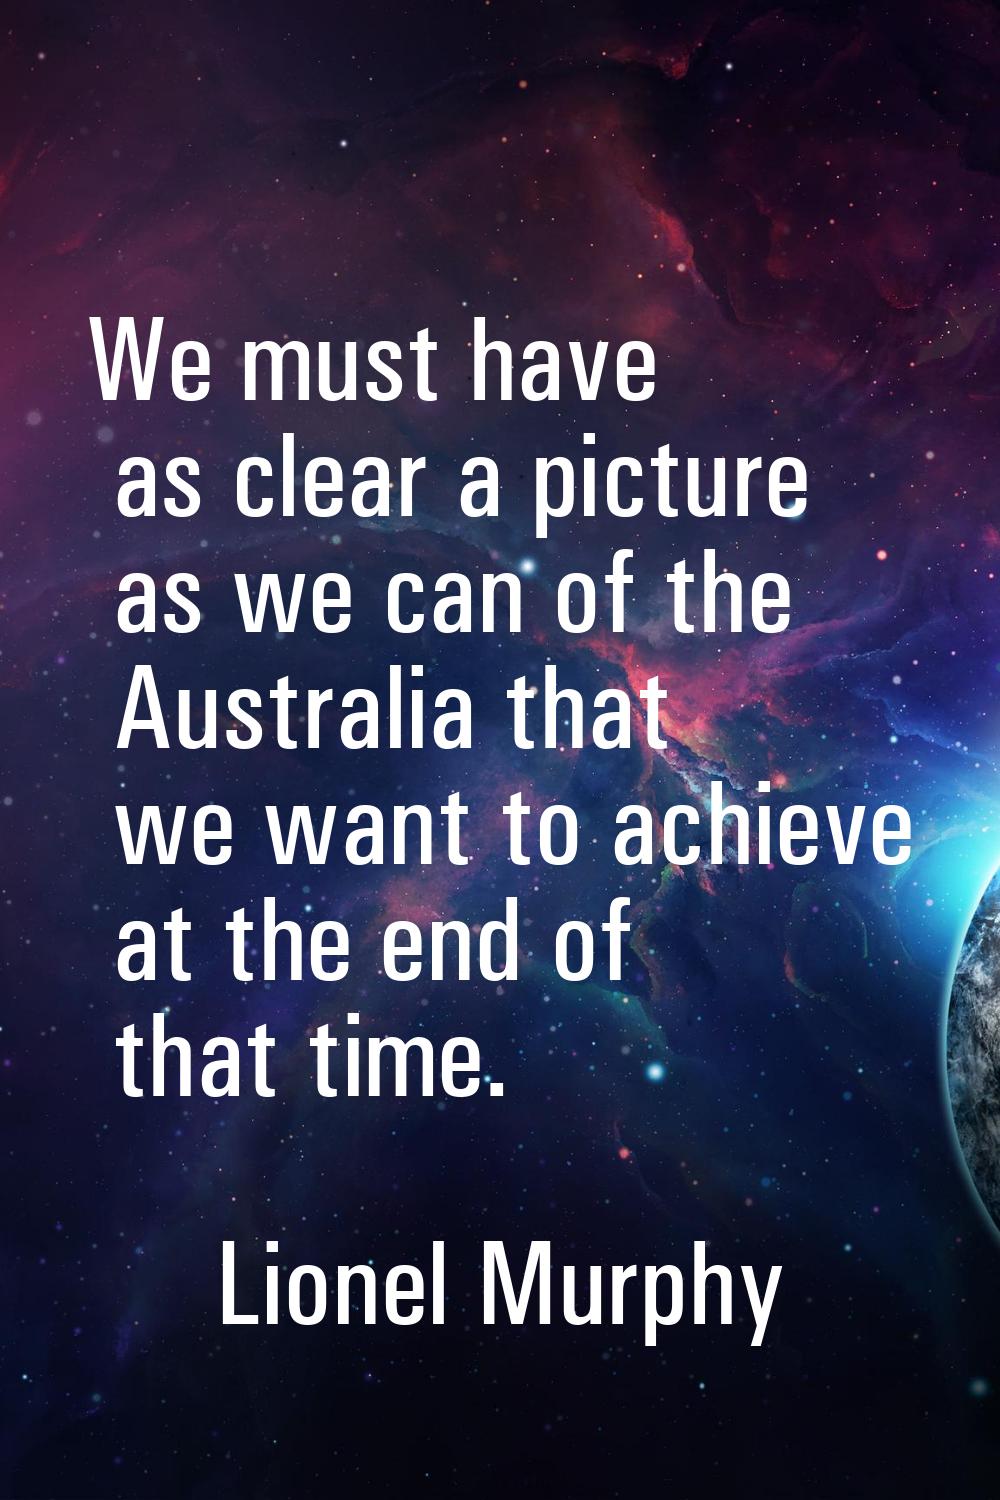 We must have as clear a picture as we can of the Australia that we want to achieve at the end of th